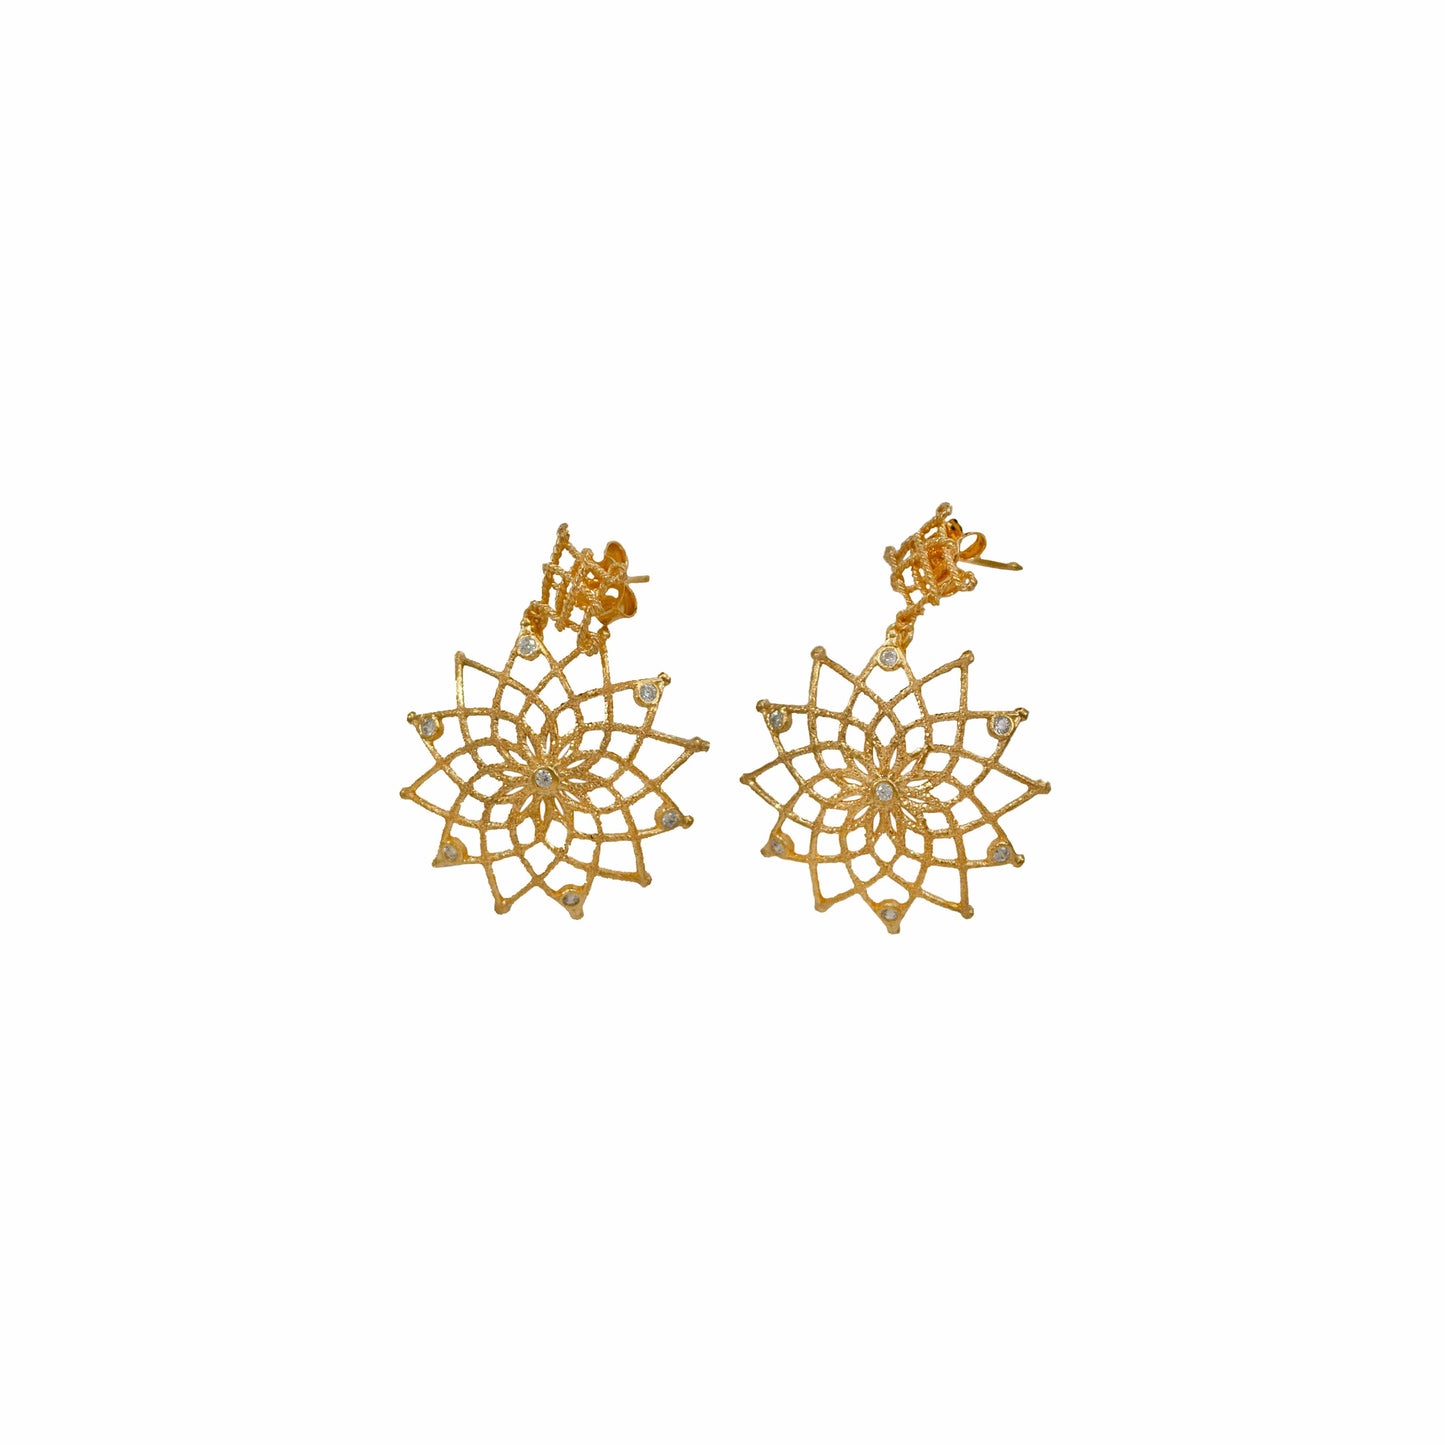 MONDO CATTOLICO 28 mm Gold Plated Caput Mundi Earrings White Crystals